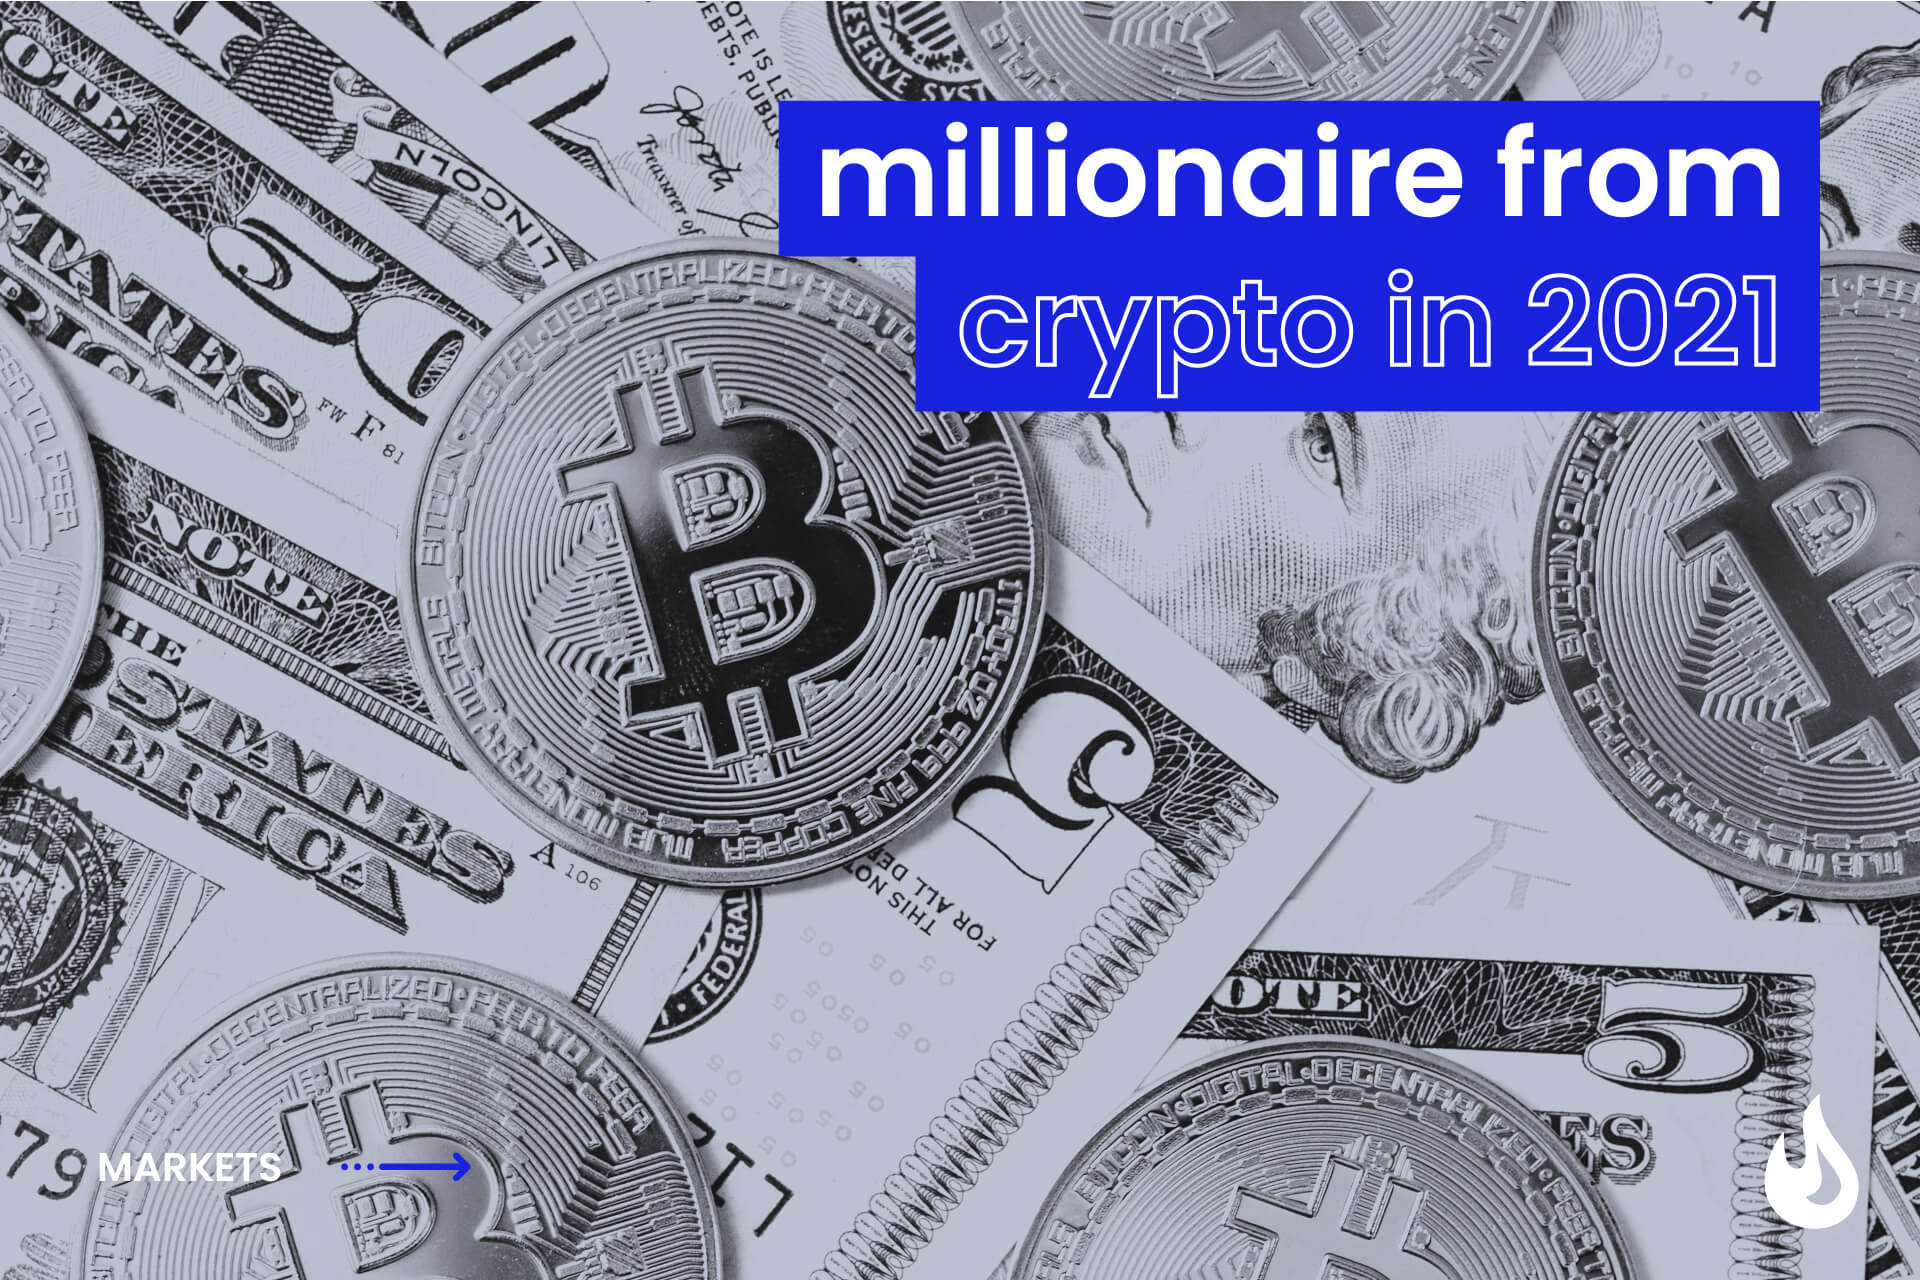 Meet the Teenage Dropout Who Became a Bitcoin Millionaire - Foundation for Economic Education